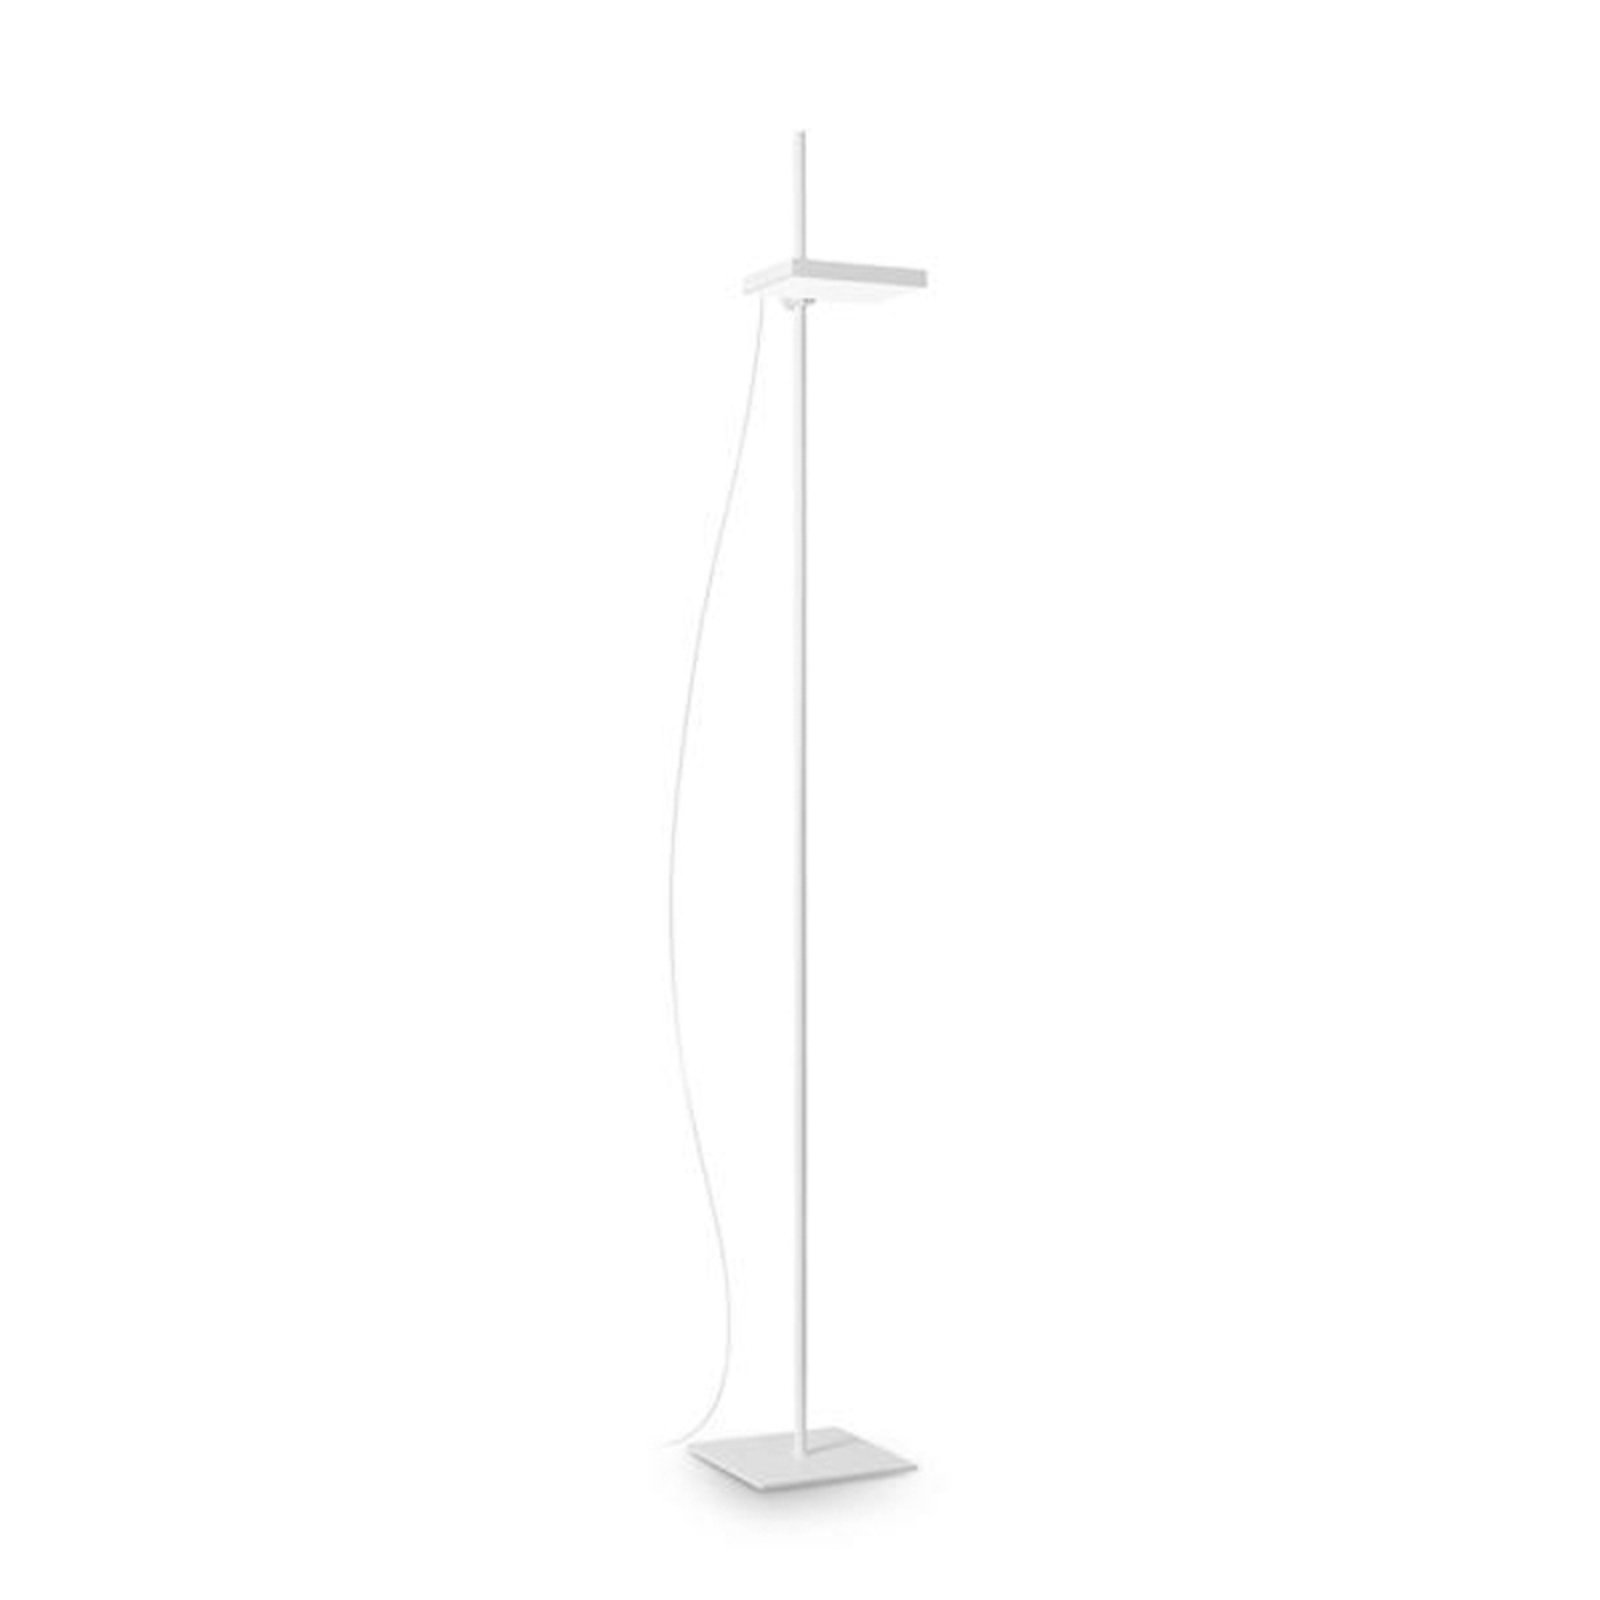 Ideal Lux LED-Stehleuchte Lift, weiß, Metall, Höhe 180 cm